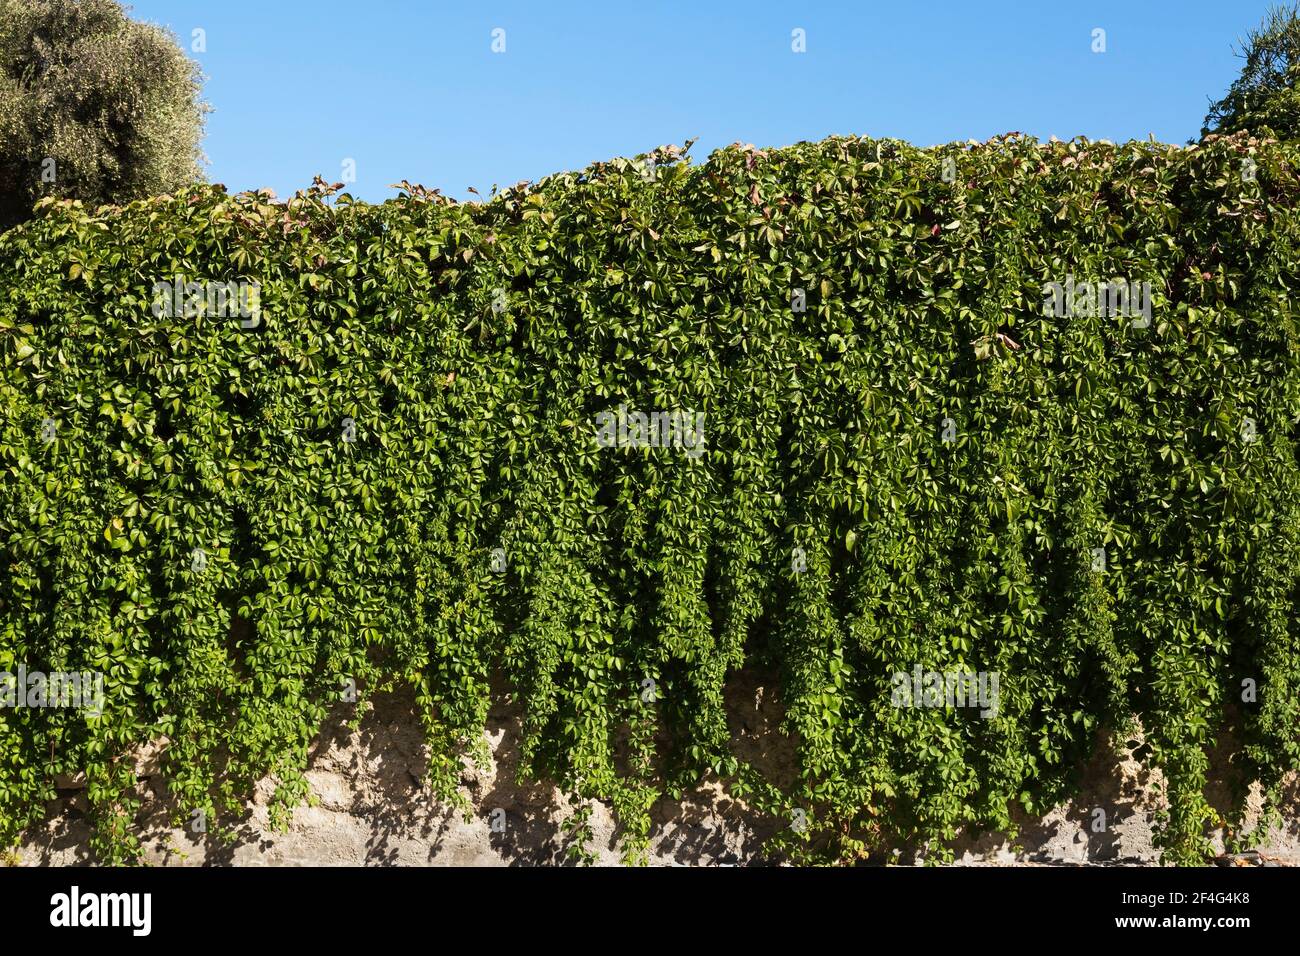 Healthy-looking climbing Vitis - Vines cascading down a stone wall Stock Photo